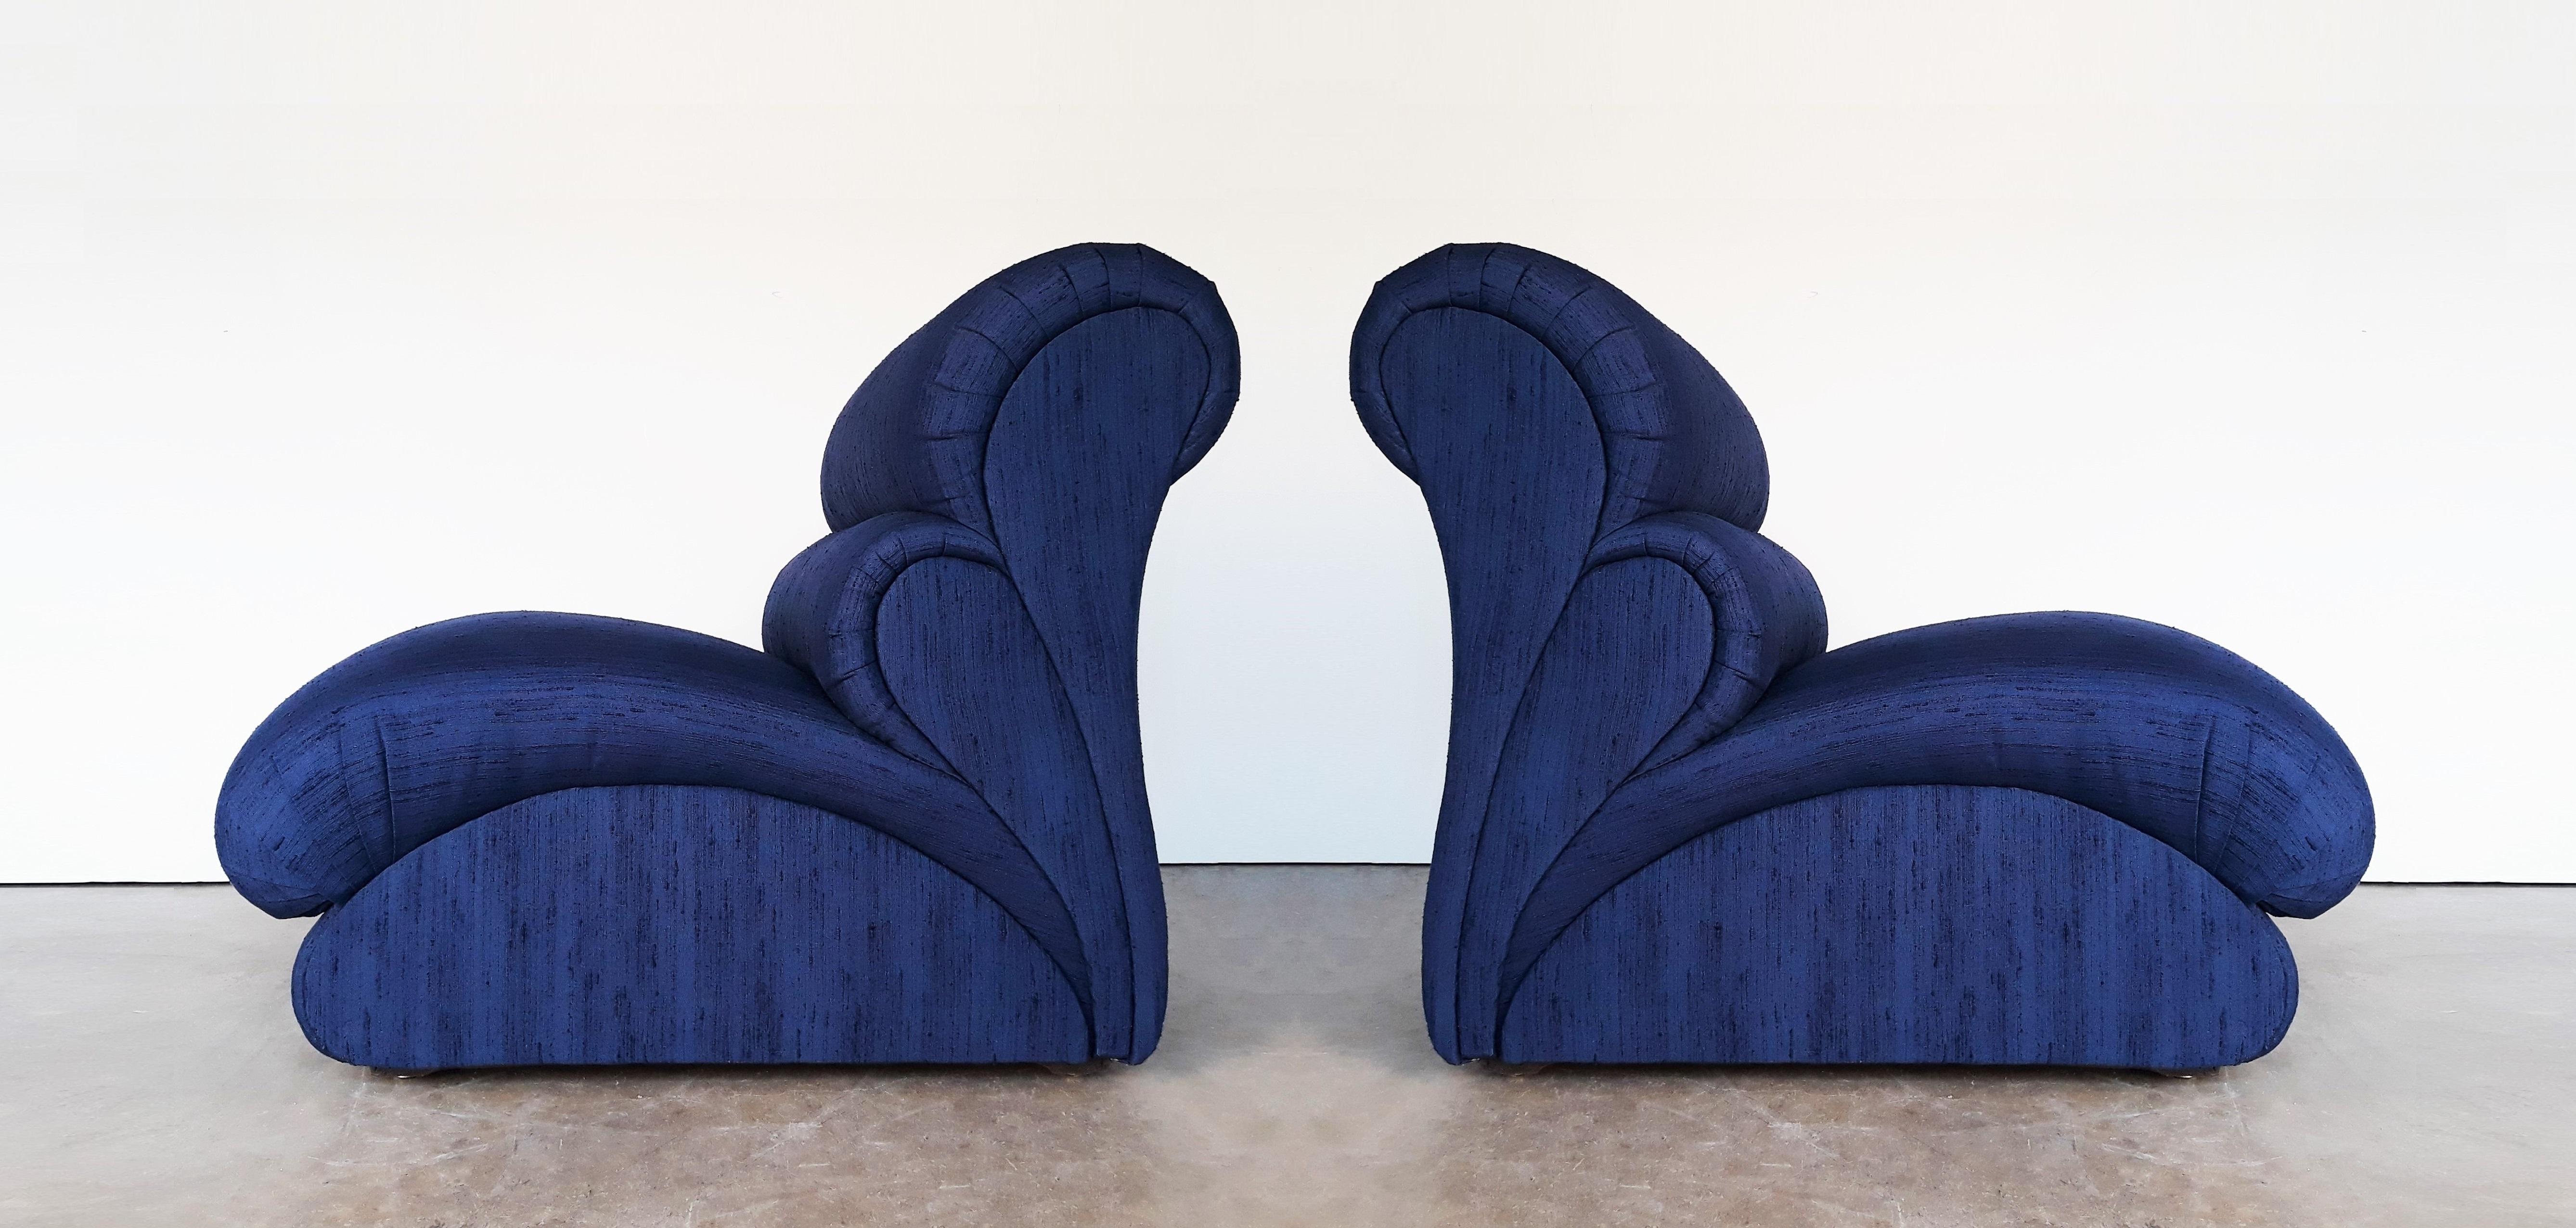 American Pair of Modern Biomorphic Lounge Chairs by Weiman, 1980s For Sale